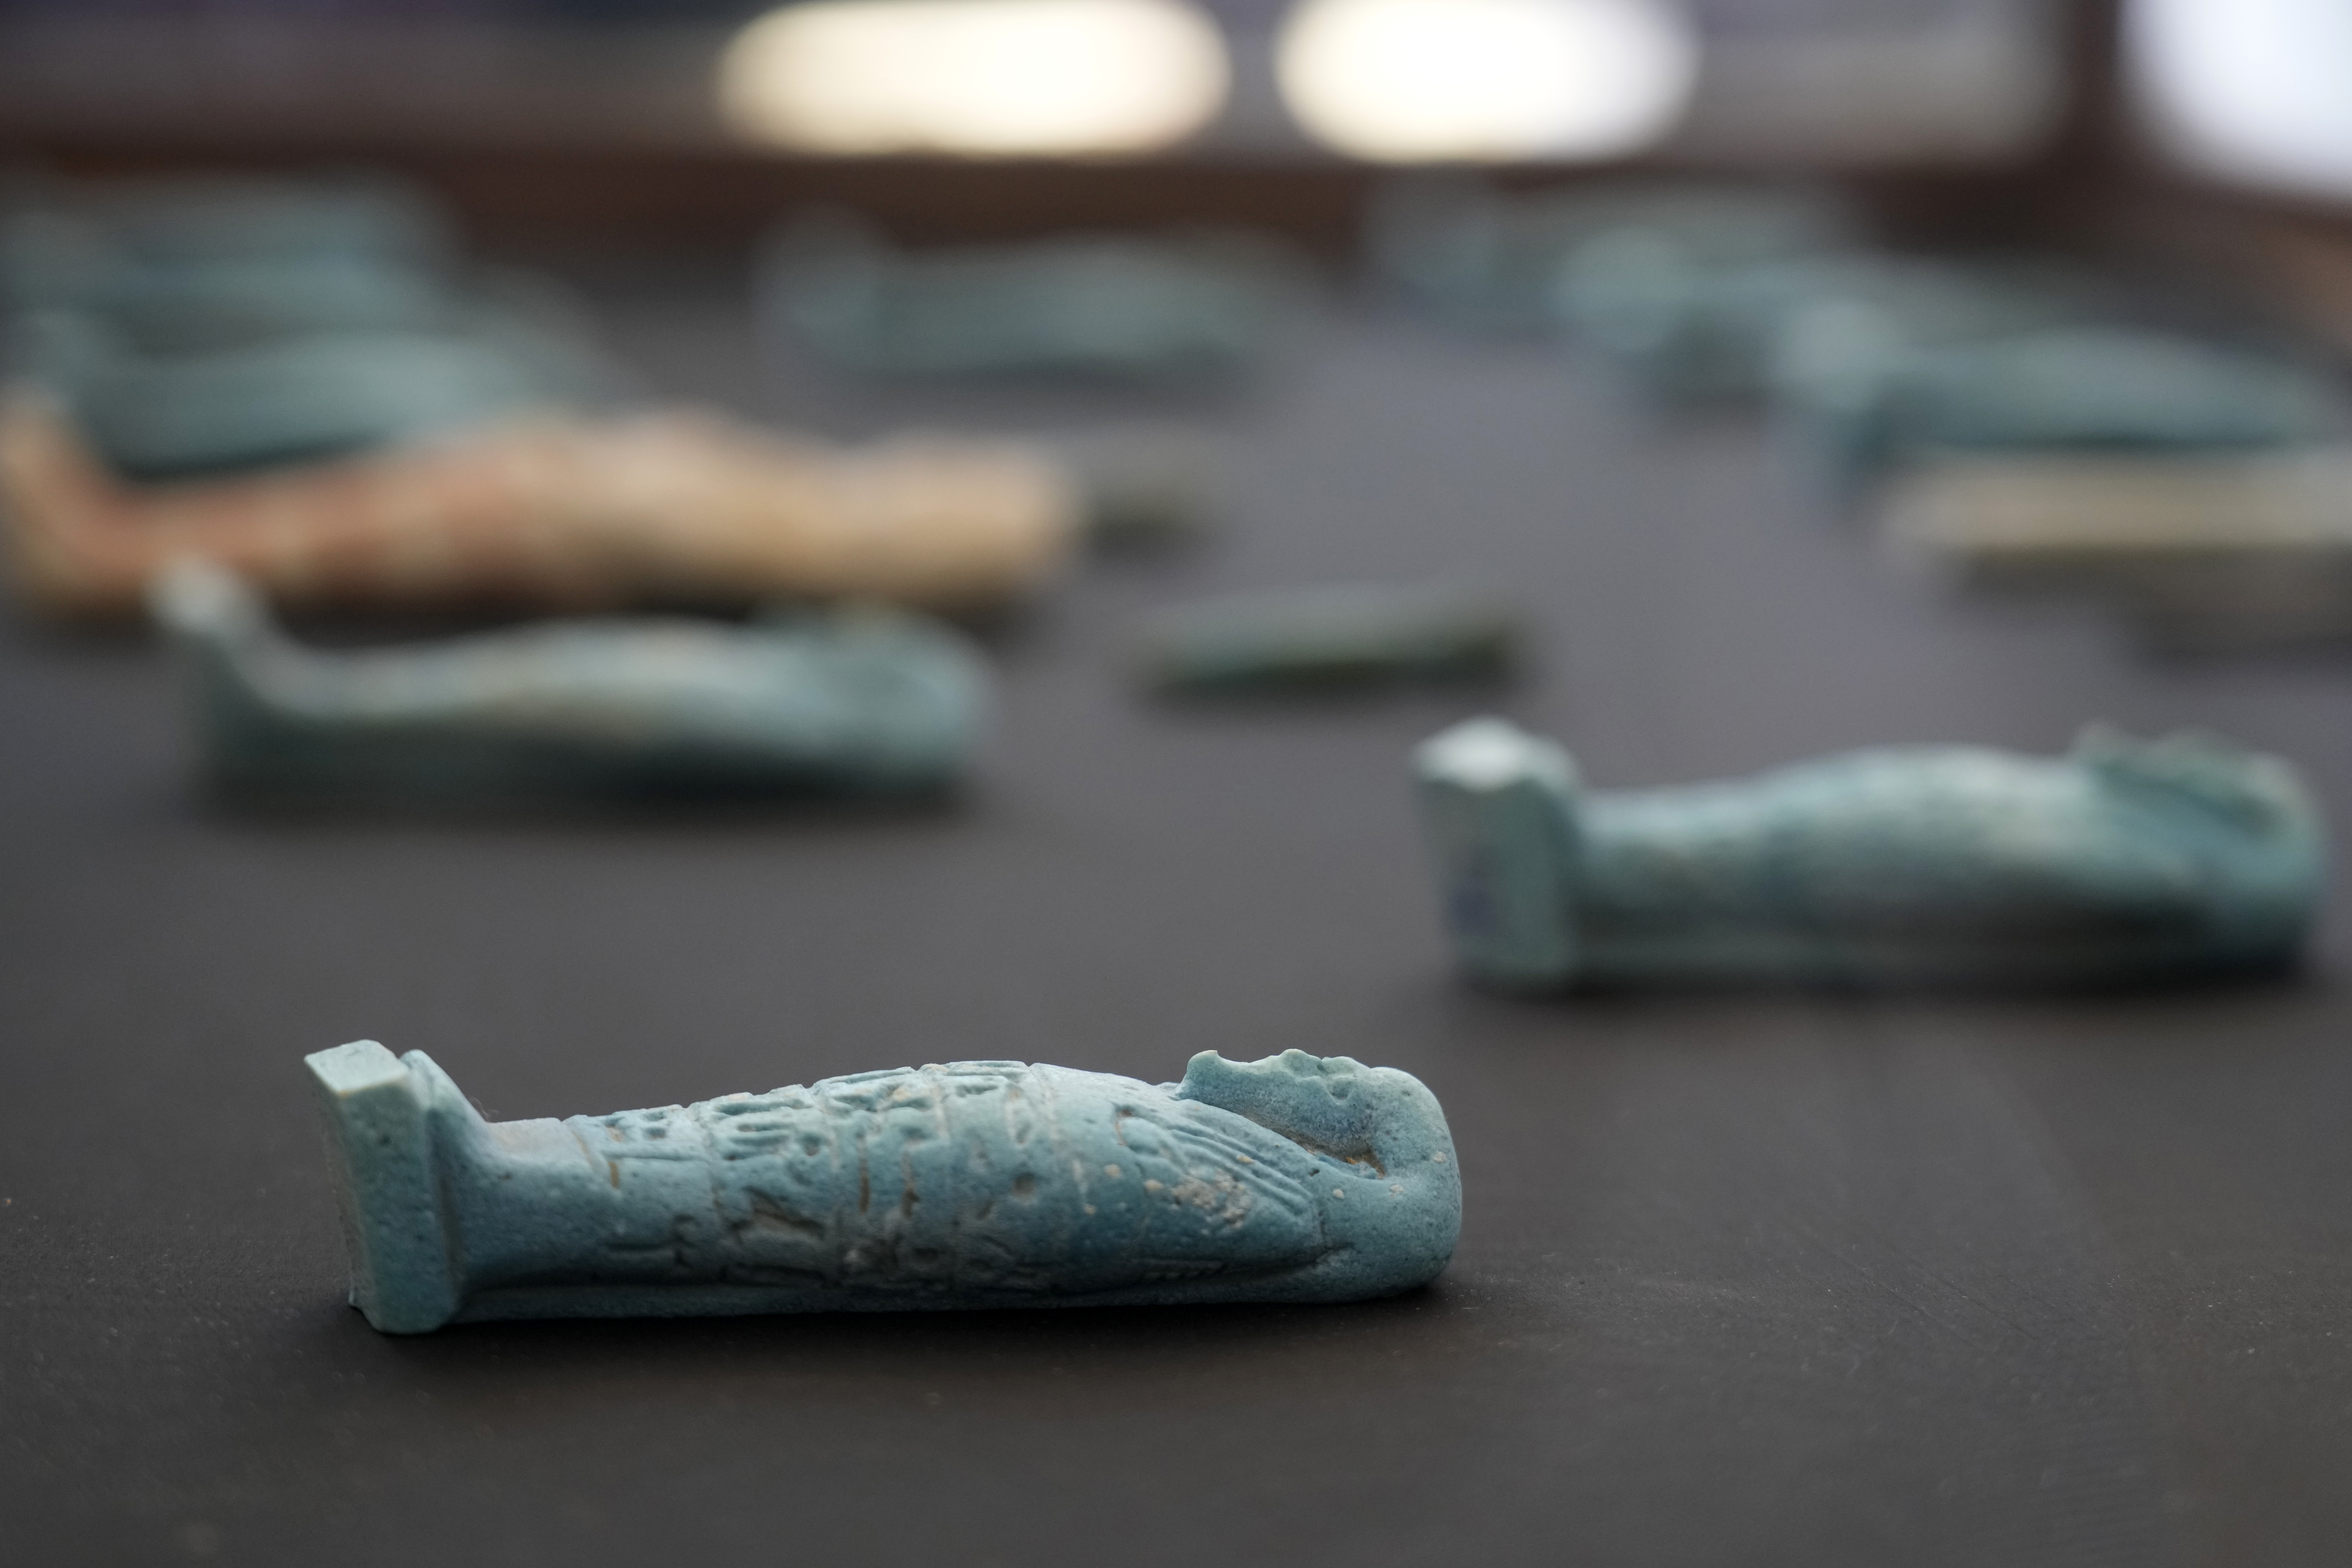 Recently discovered artifacts are displayed during a press conference (AP Photo/Amr Nabil)